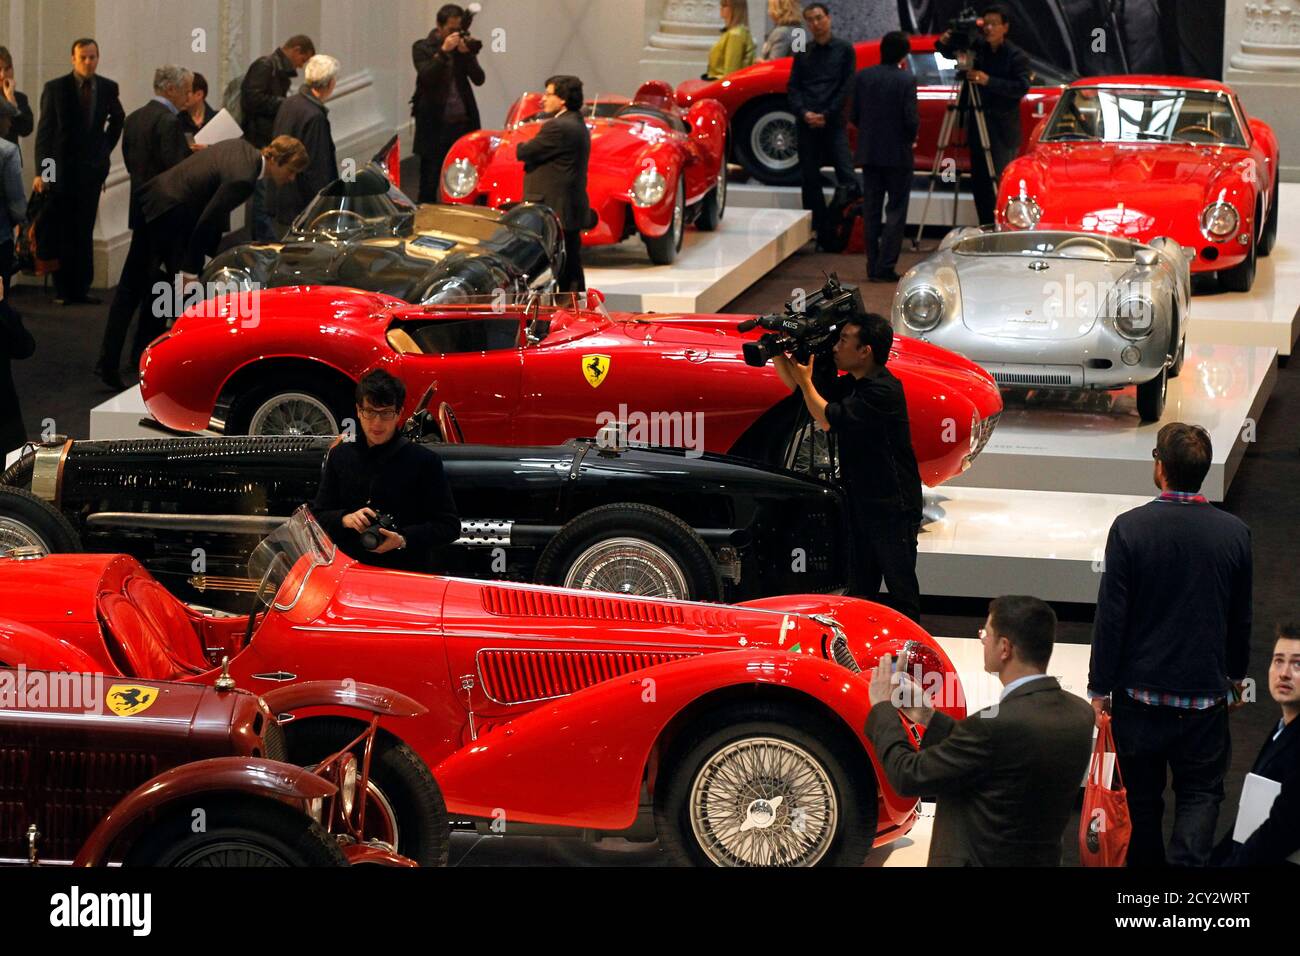 Visitors look at vintage sports cars during the press day of the exhibition  'The Art of the Automobile, Masterpieces from the Ralph Lauren Collection'  at Les Arts Decoratifs Museum in Paris April